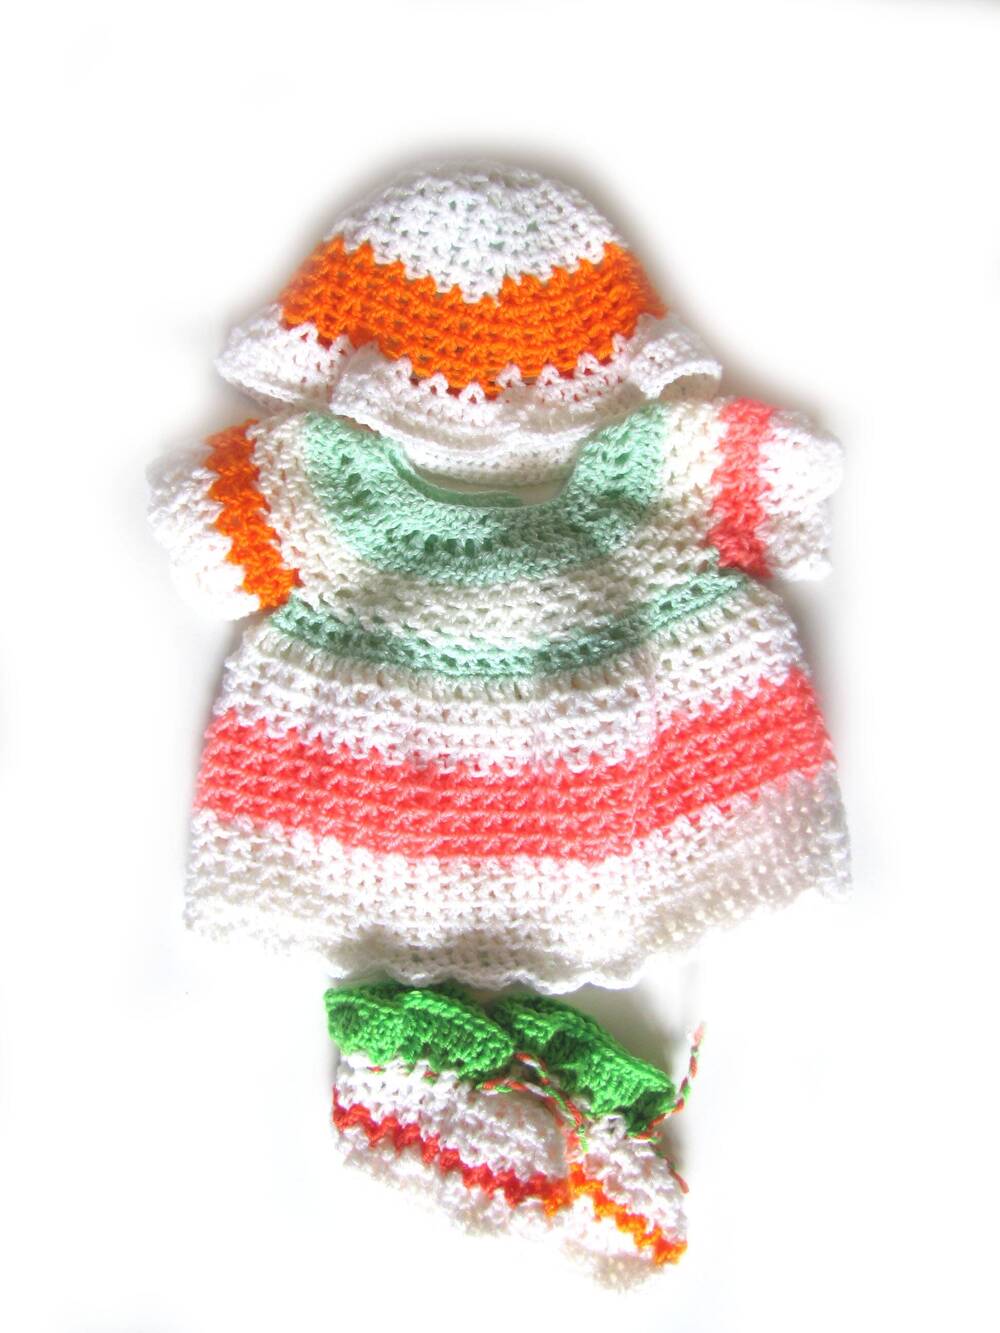 KSS Bright Colored Crocheted Dress, Booties and Hat 6 Months DR-175